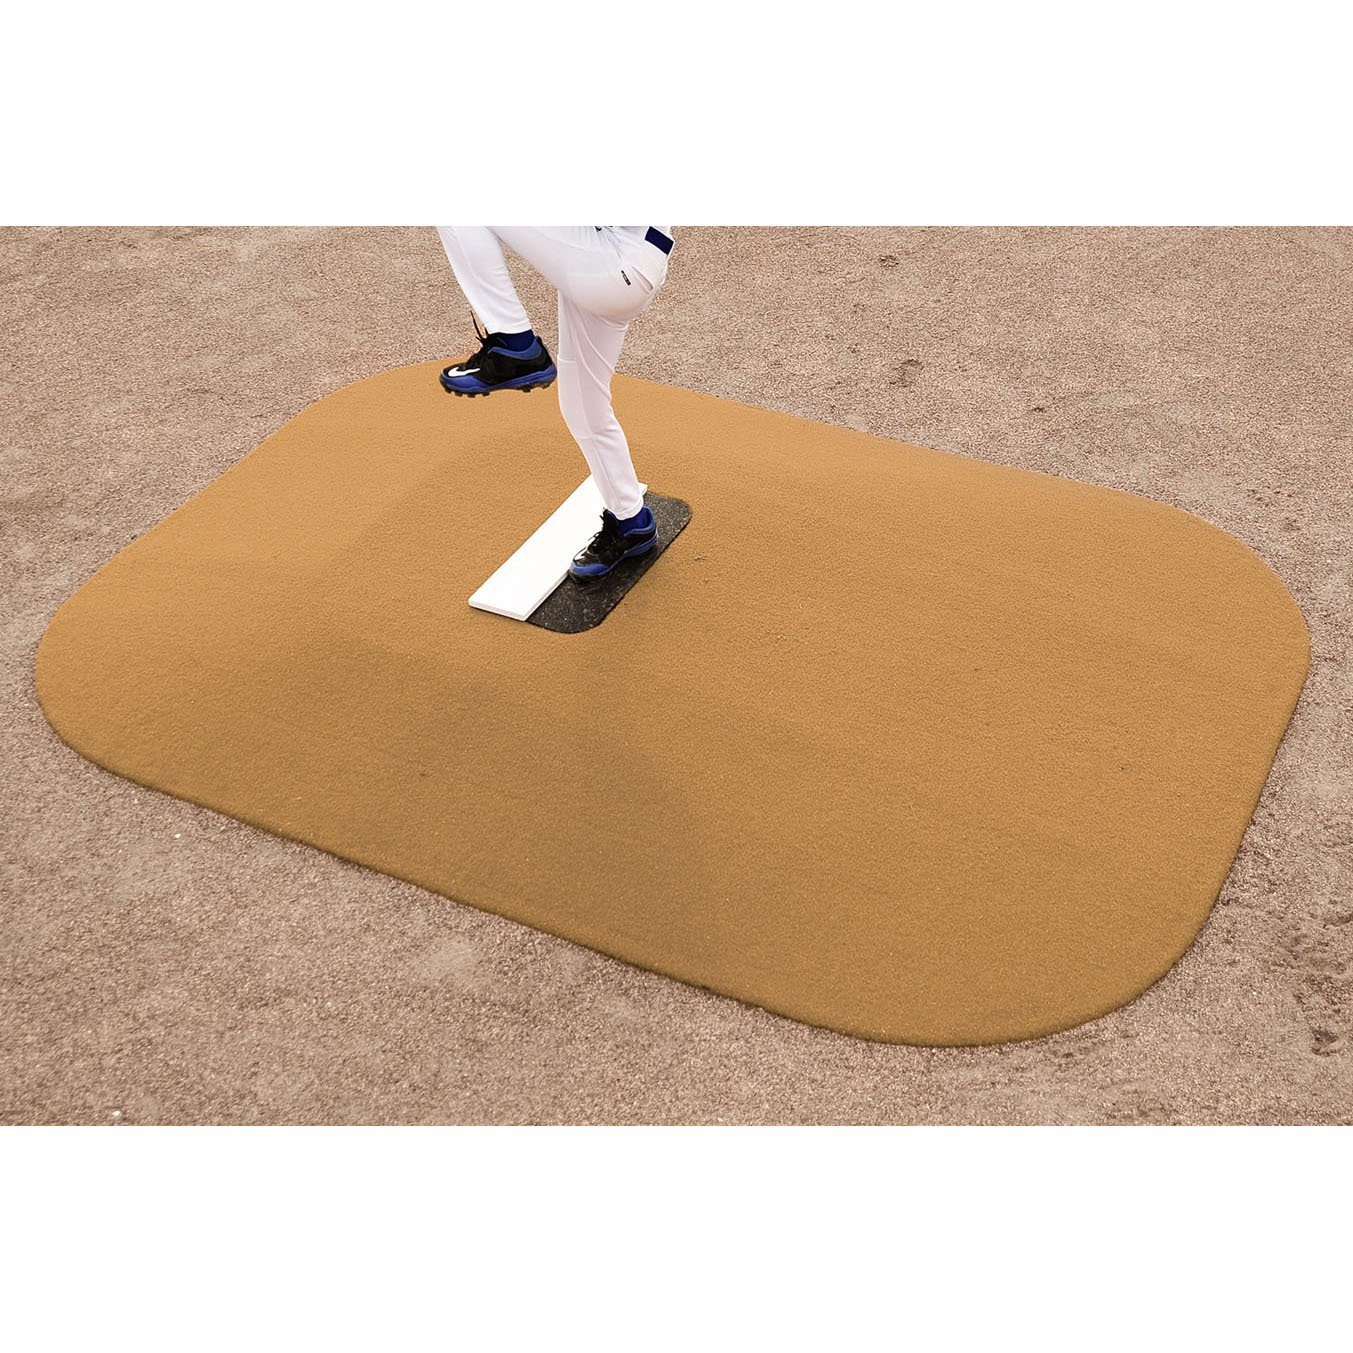 Pitch Pro 796 Portable Youth Game Pitching Mound